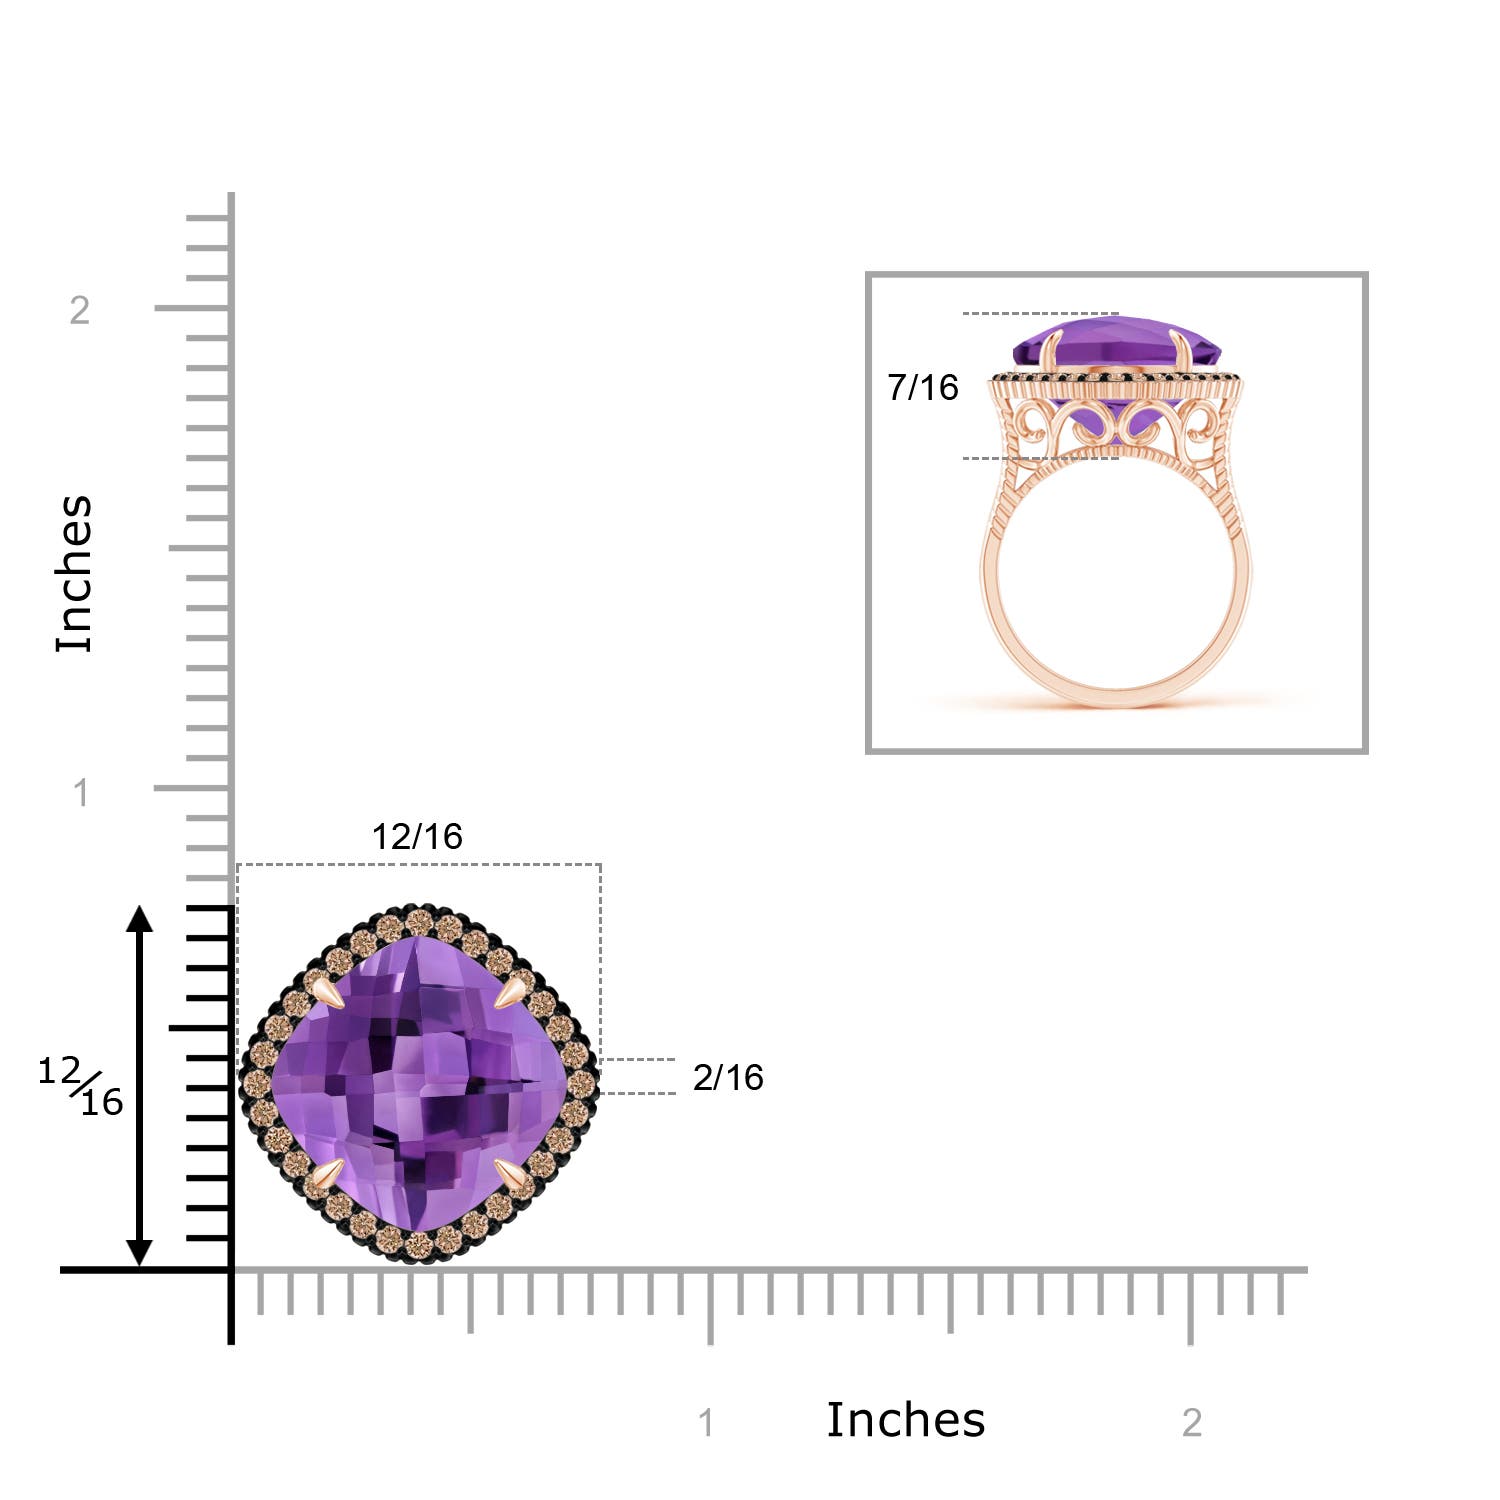 AA - Amethyst / 8.38 CT / 14 KT Rose Gold